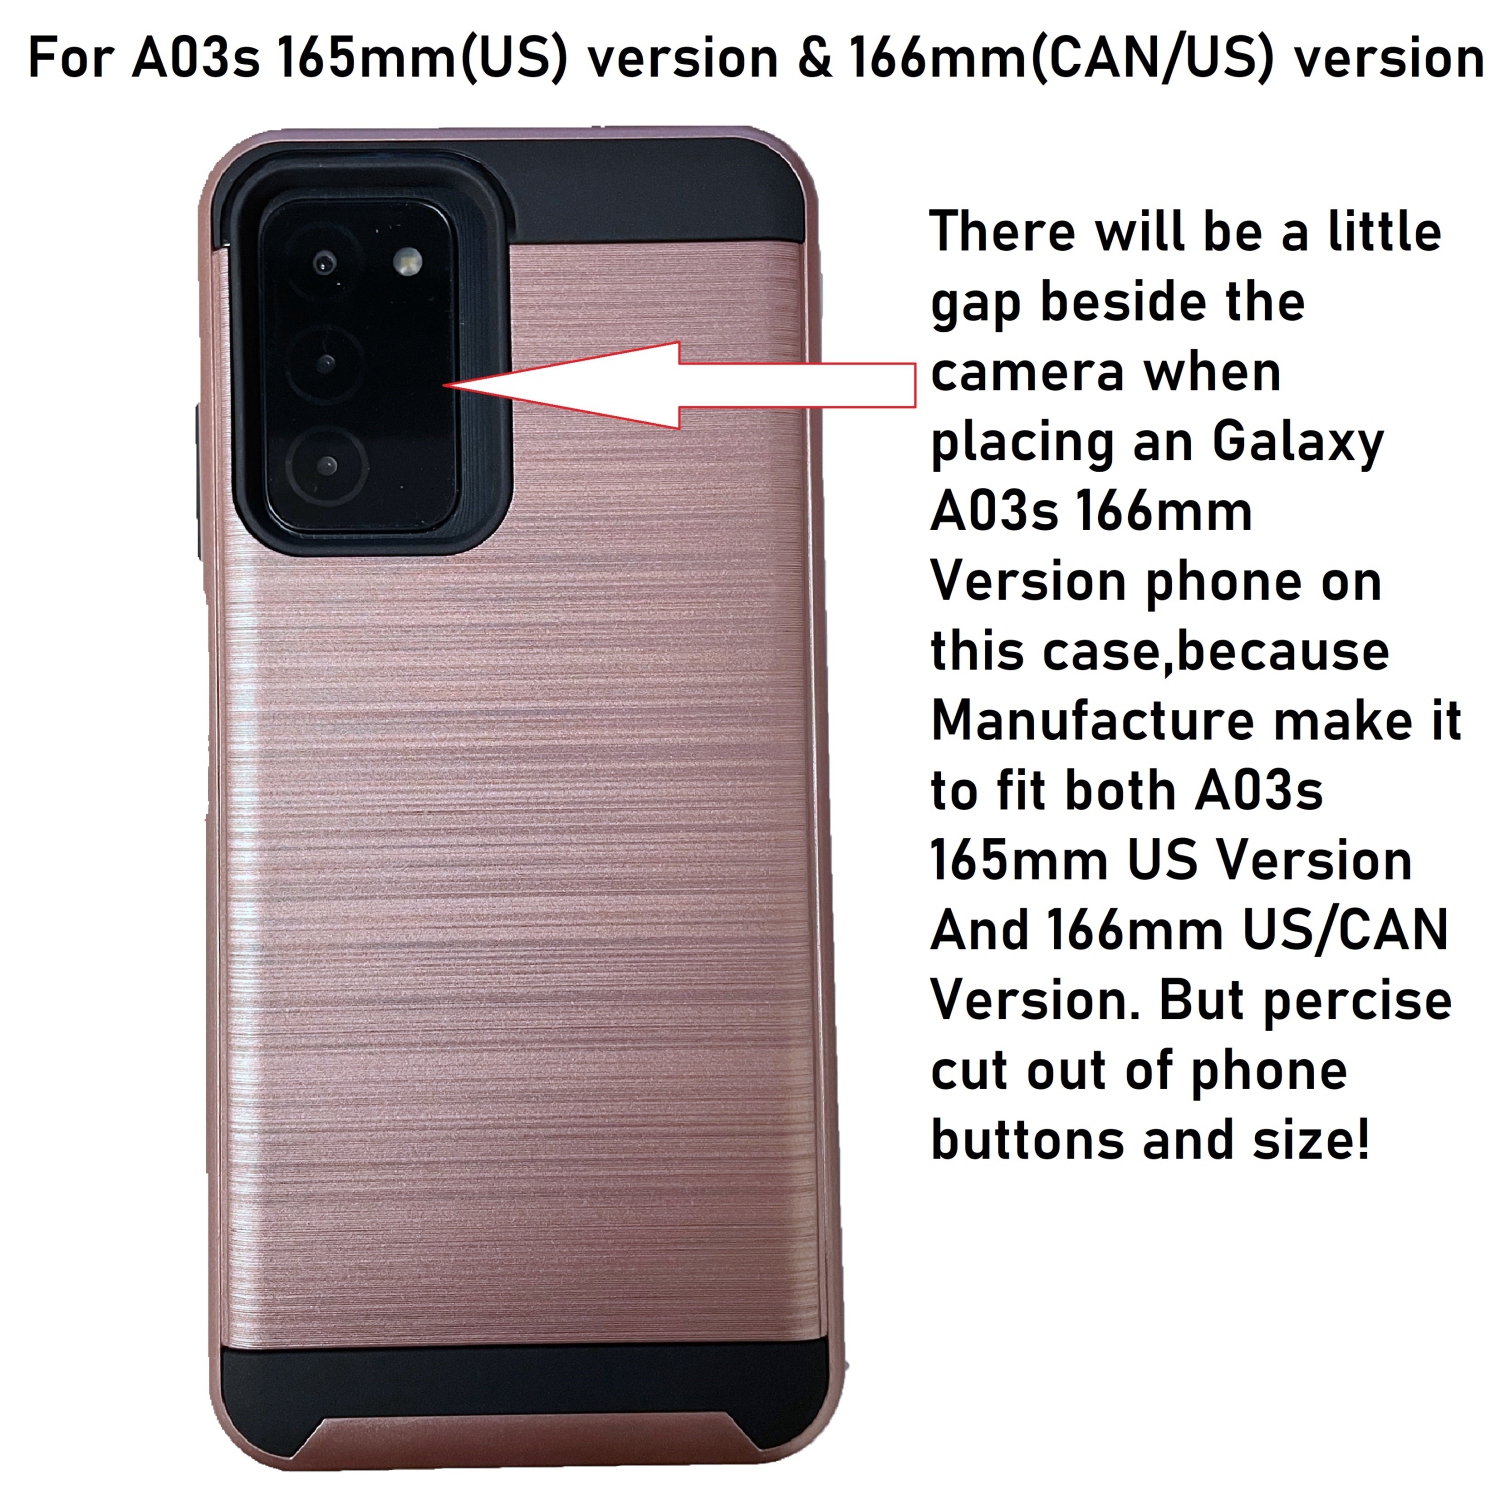 TopSave Blushed Texture PC+TPU Hard Rugged Cover Case For Samsung Galaxy A03s 165mm US Version And 166mm CAN/US Version, Rose Gold